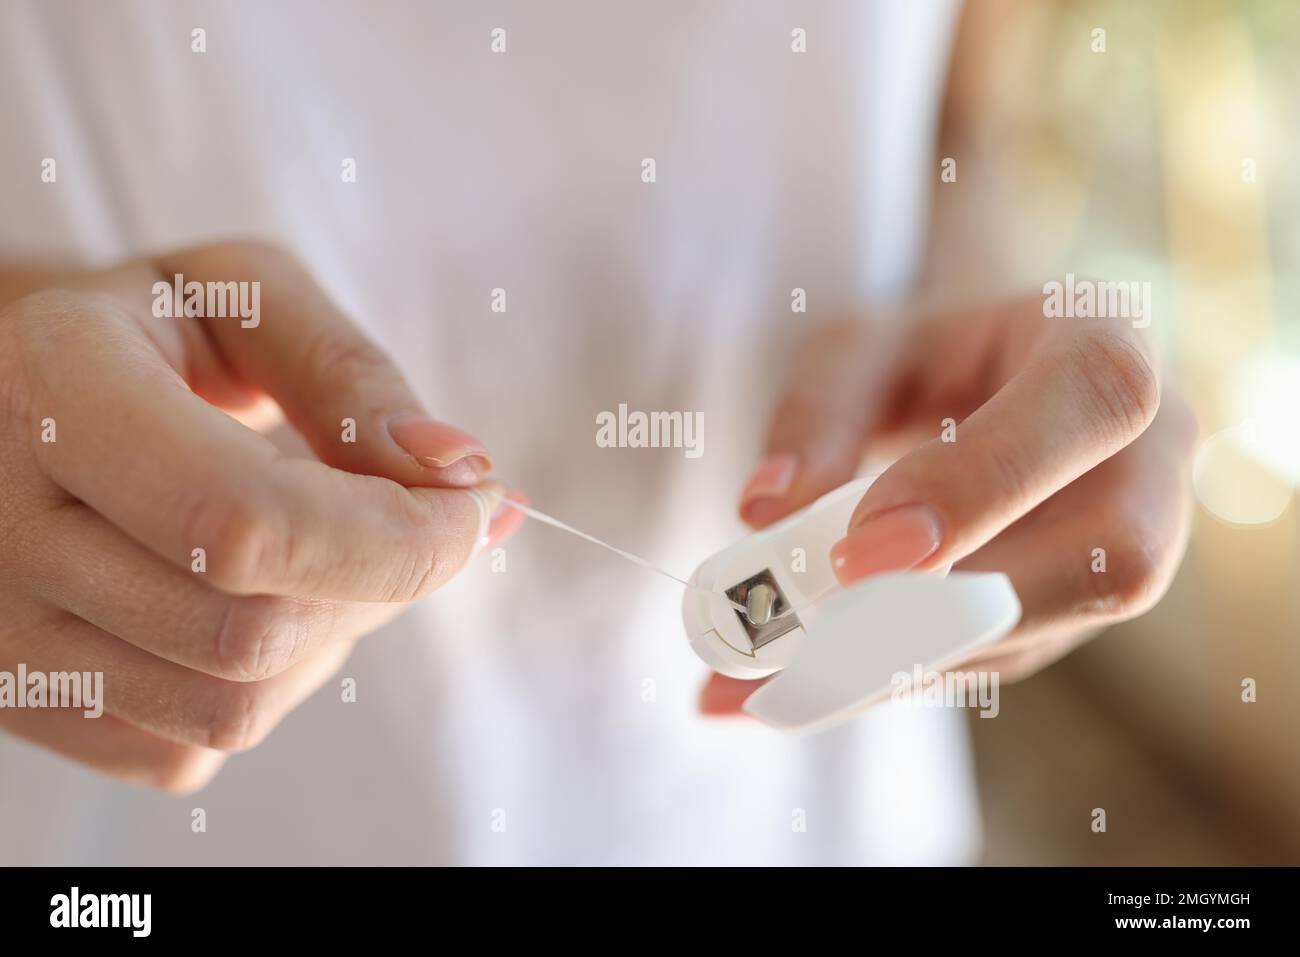 Women's hands pull out the dental floss close-up. Stock Photo